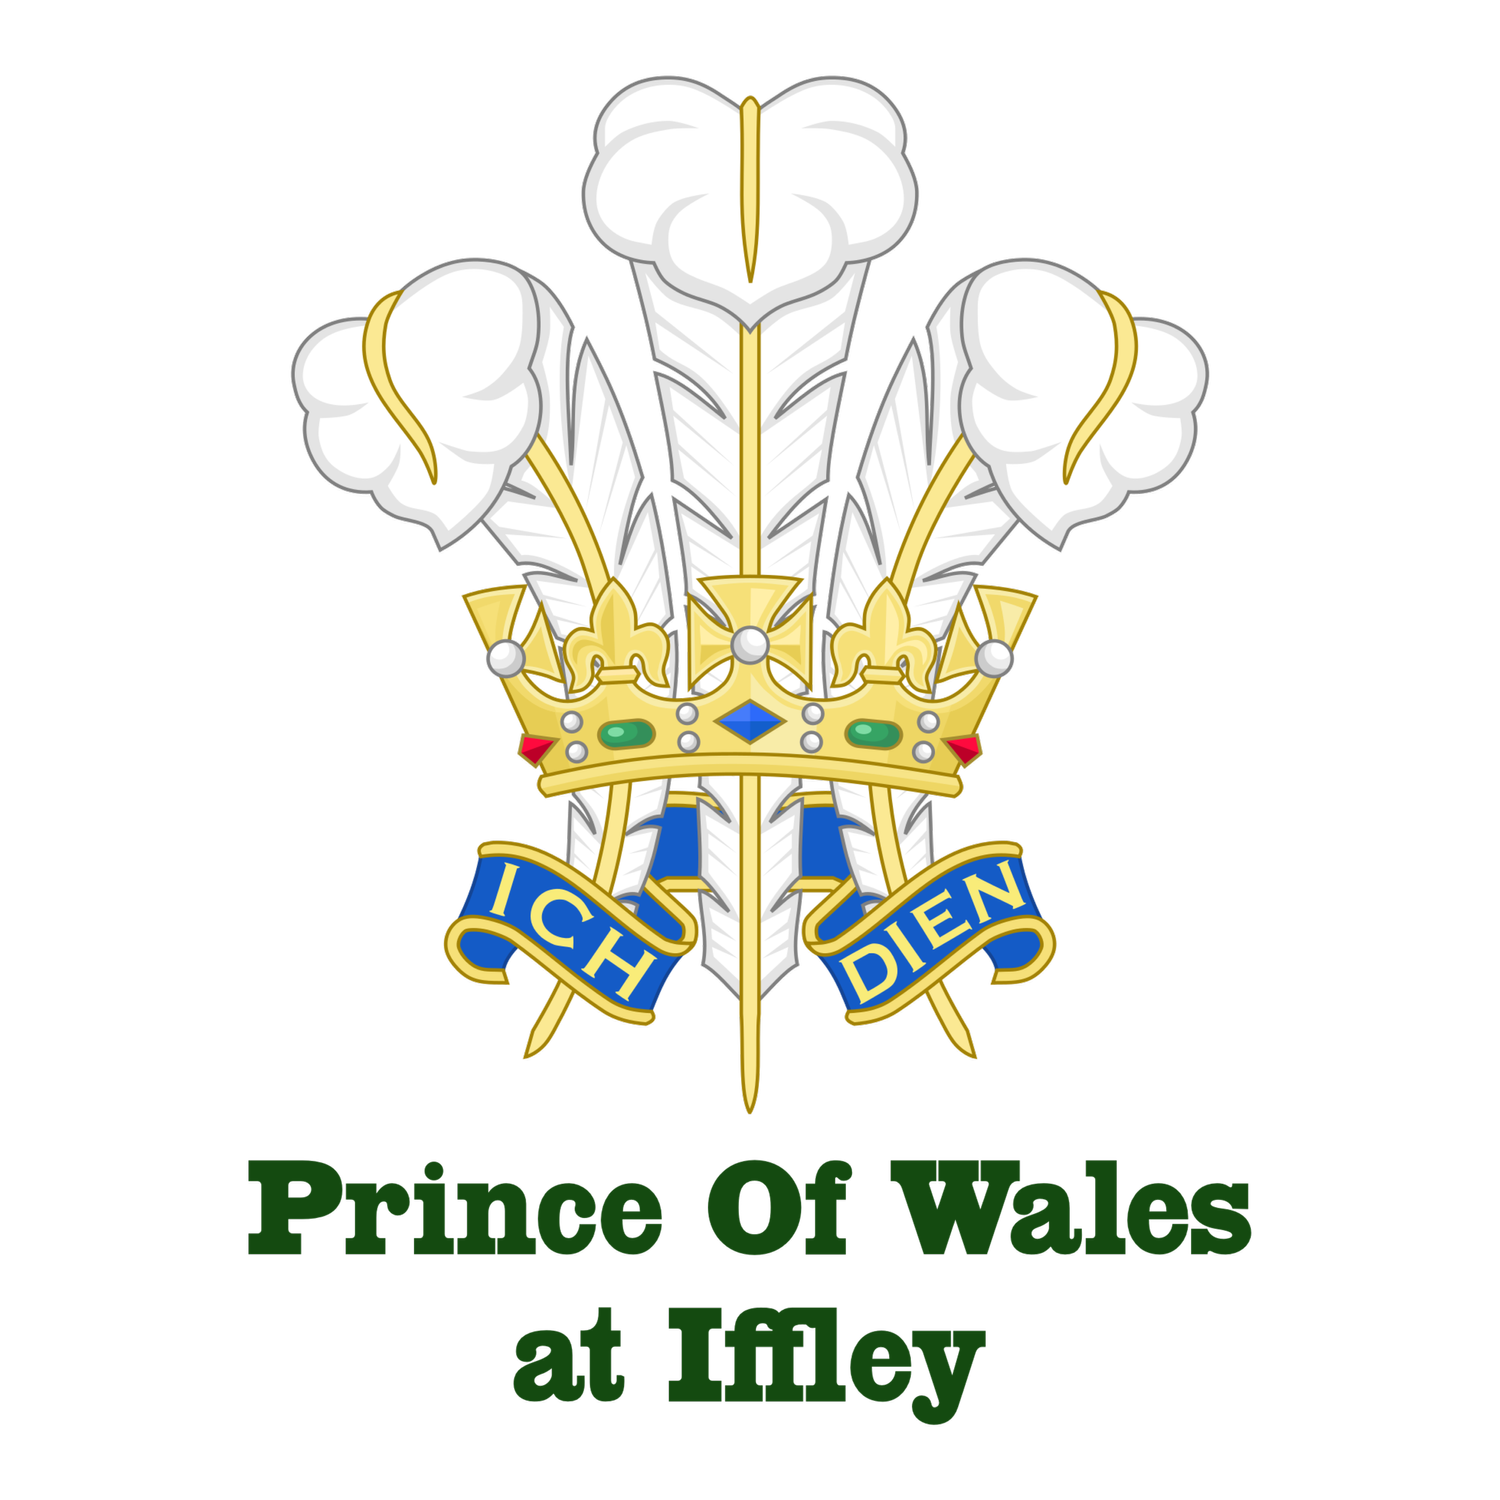 The Prince of Wales at Iffley